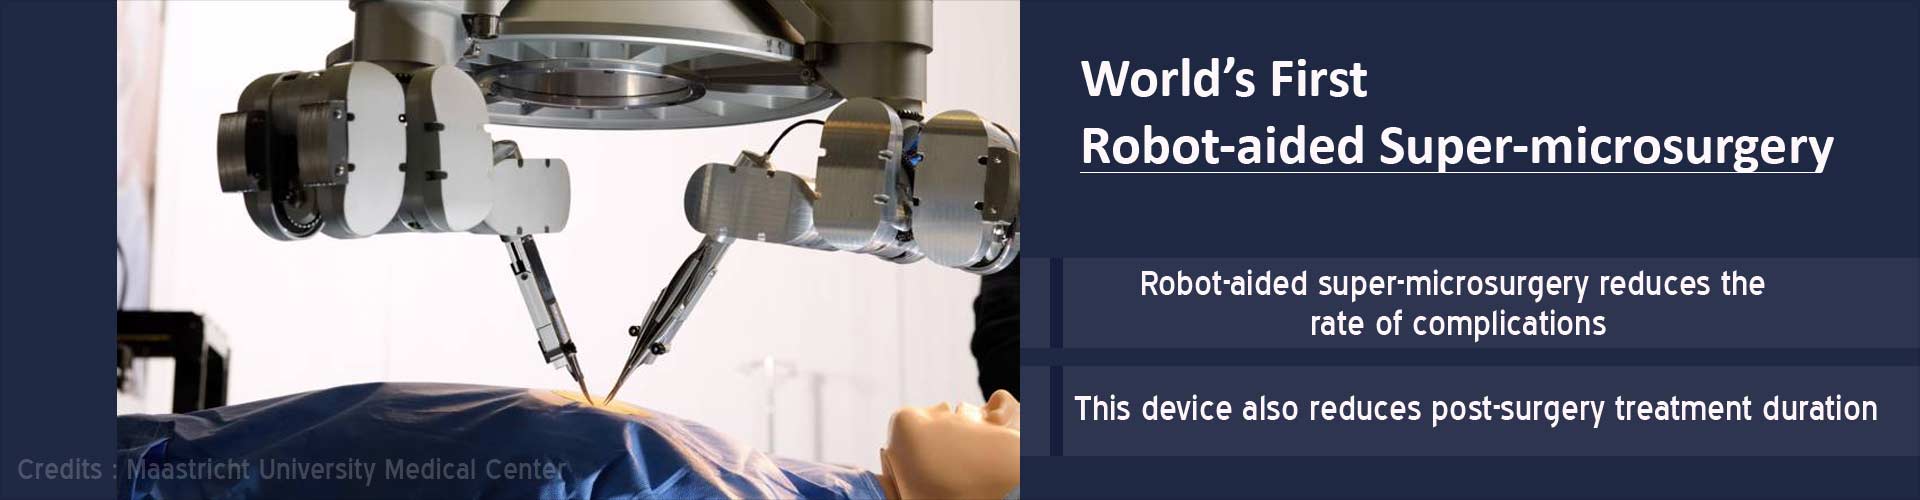 World's first robot-aided super-microsurgery
- Robot-aided super-microsurgery reduces the rate of complications
- This device also reduces post-surgery treatment duration